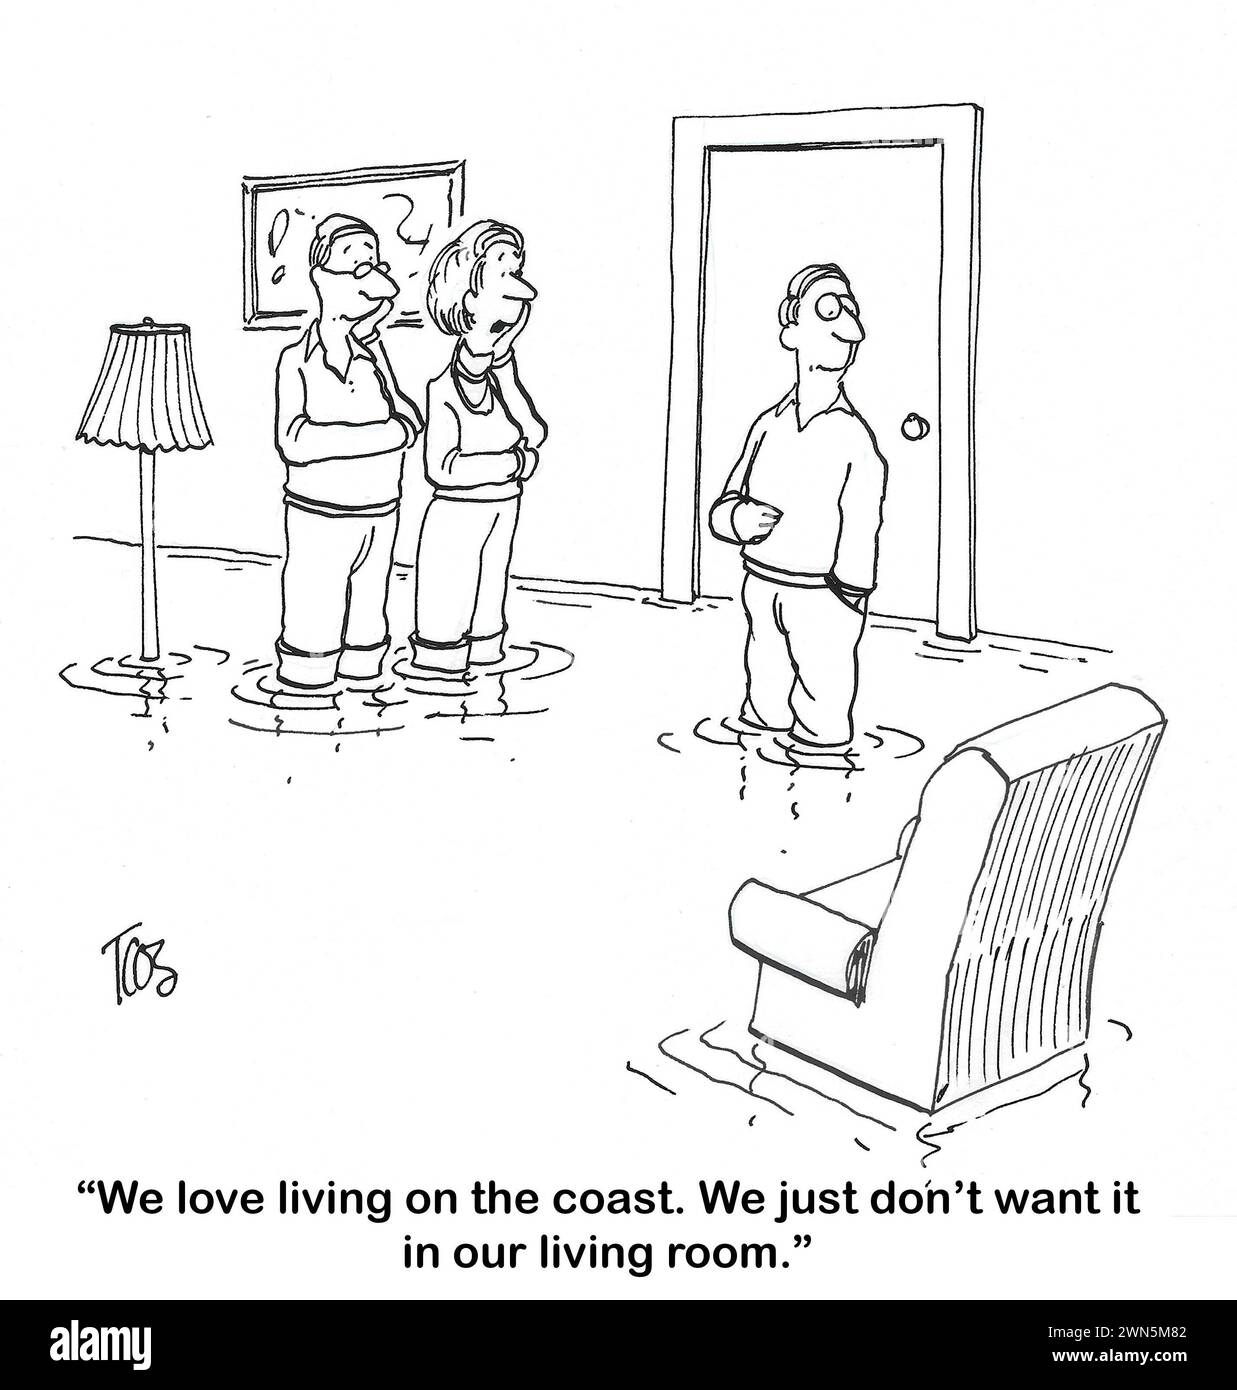 BW cartoon showing that the coastal waters have entered the couple's living room. Stock Photo